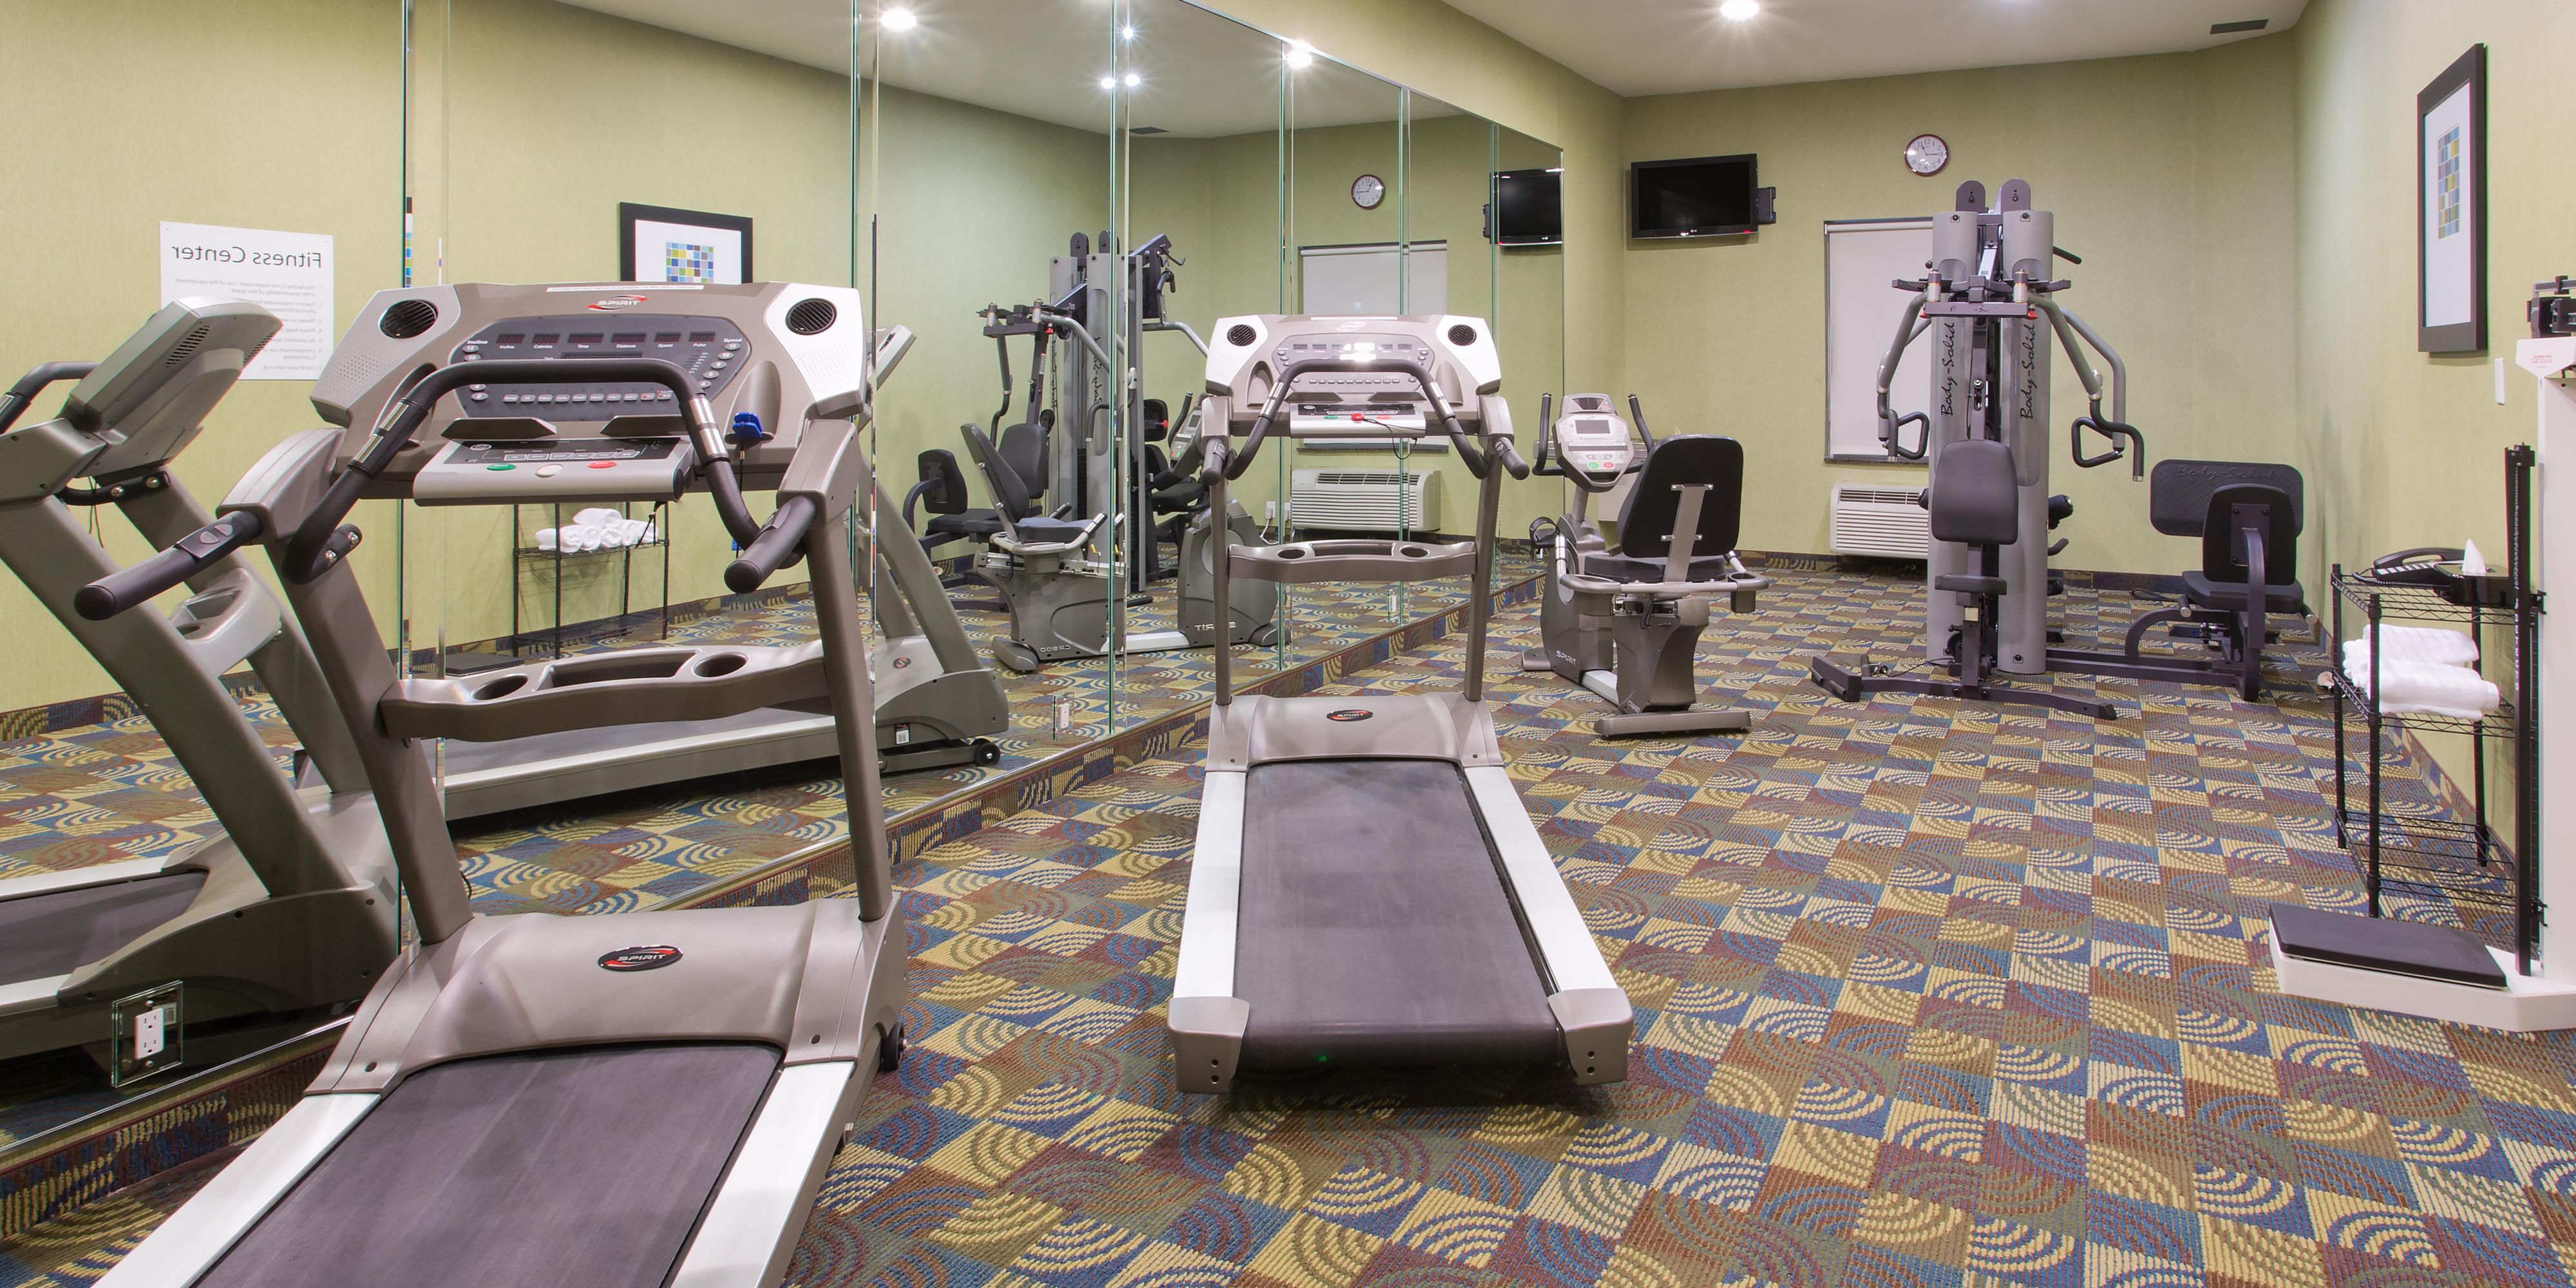 Stay fit while on the go with our recumbent bike, elliptical, treadmill and free weights. Open 24/7